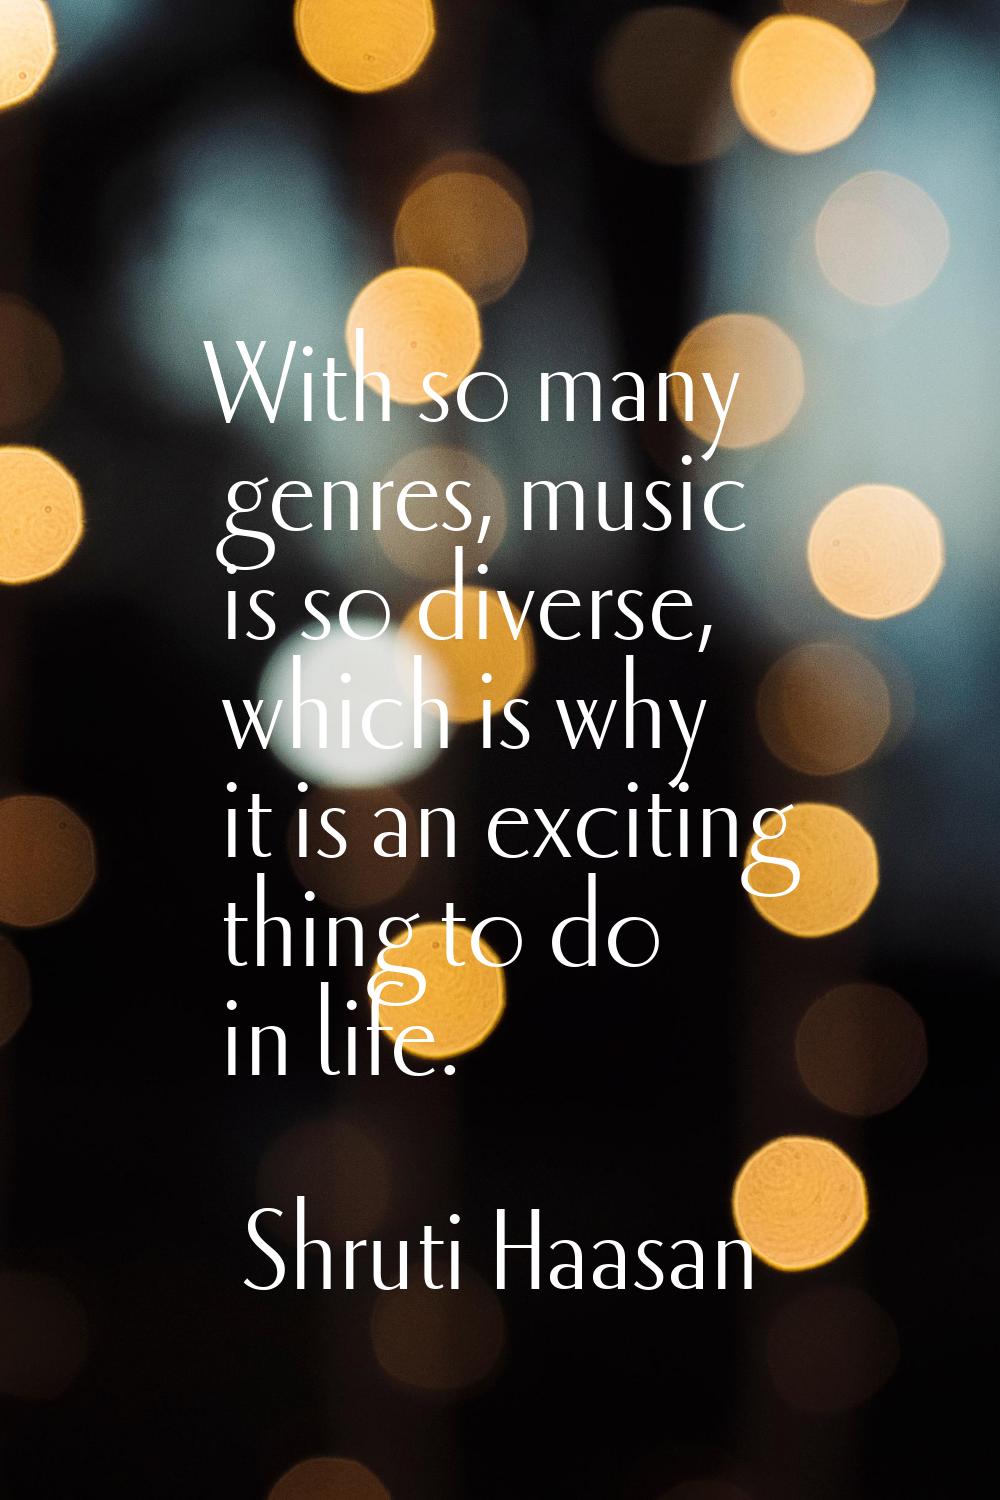 With so many genres, music is so diverse, which is why it is an exciting thing to do in life.